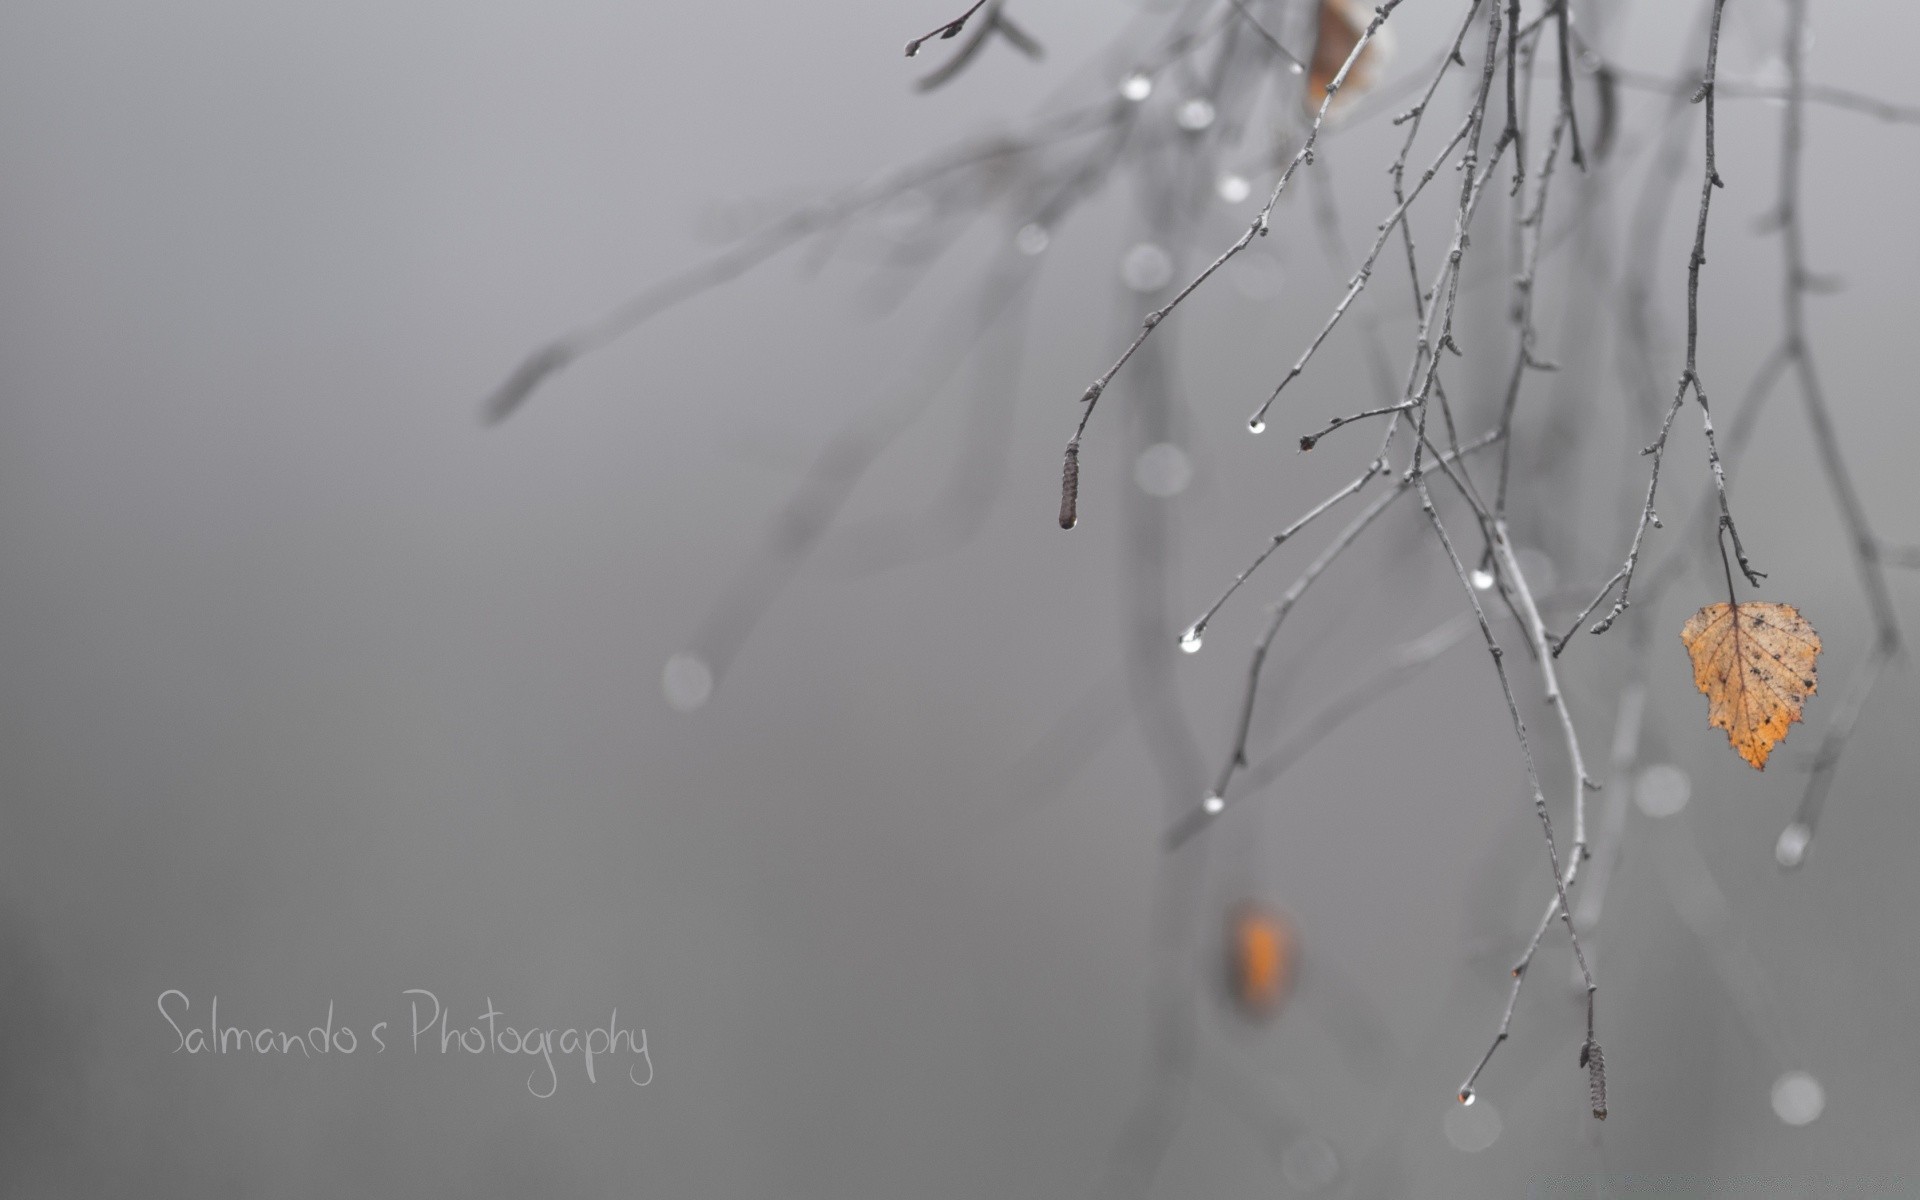 black and white spider insect winter nature snow blur flower spiderweb outdoors dew dawn drop desktop light tree weather abstract daylight frozen